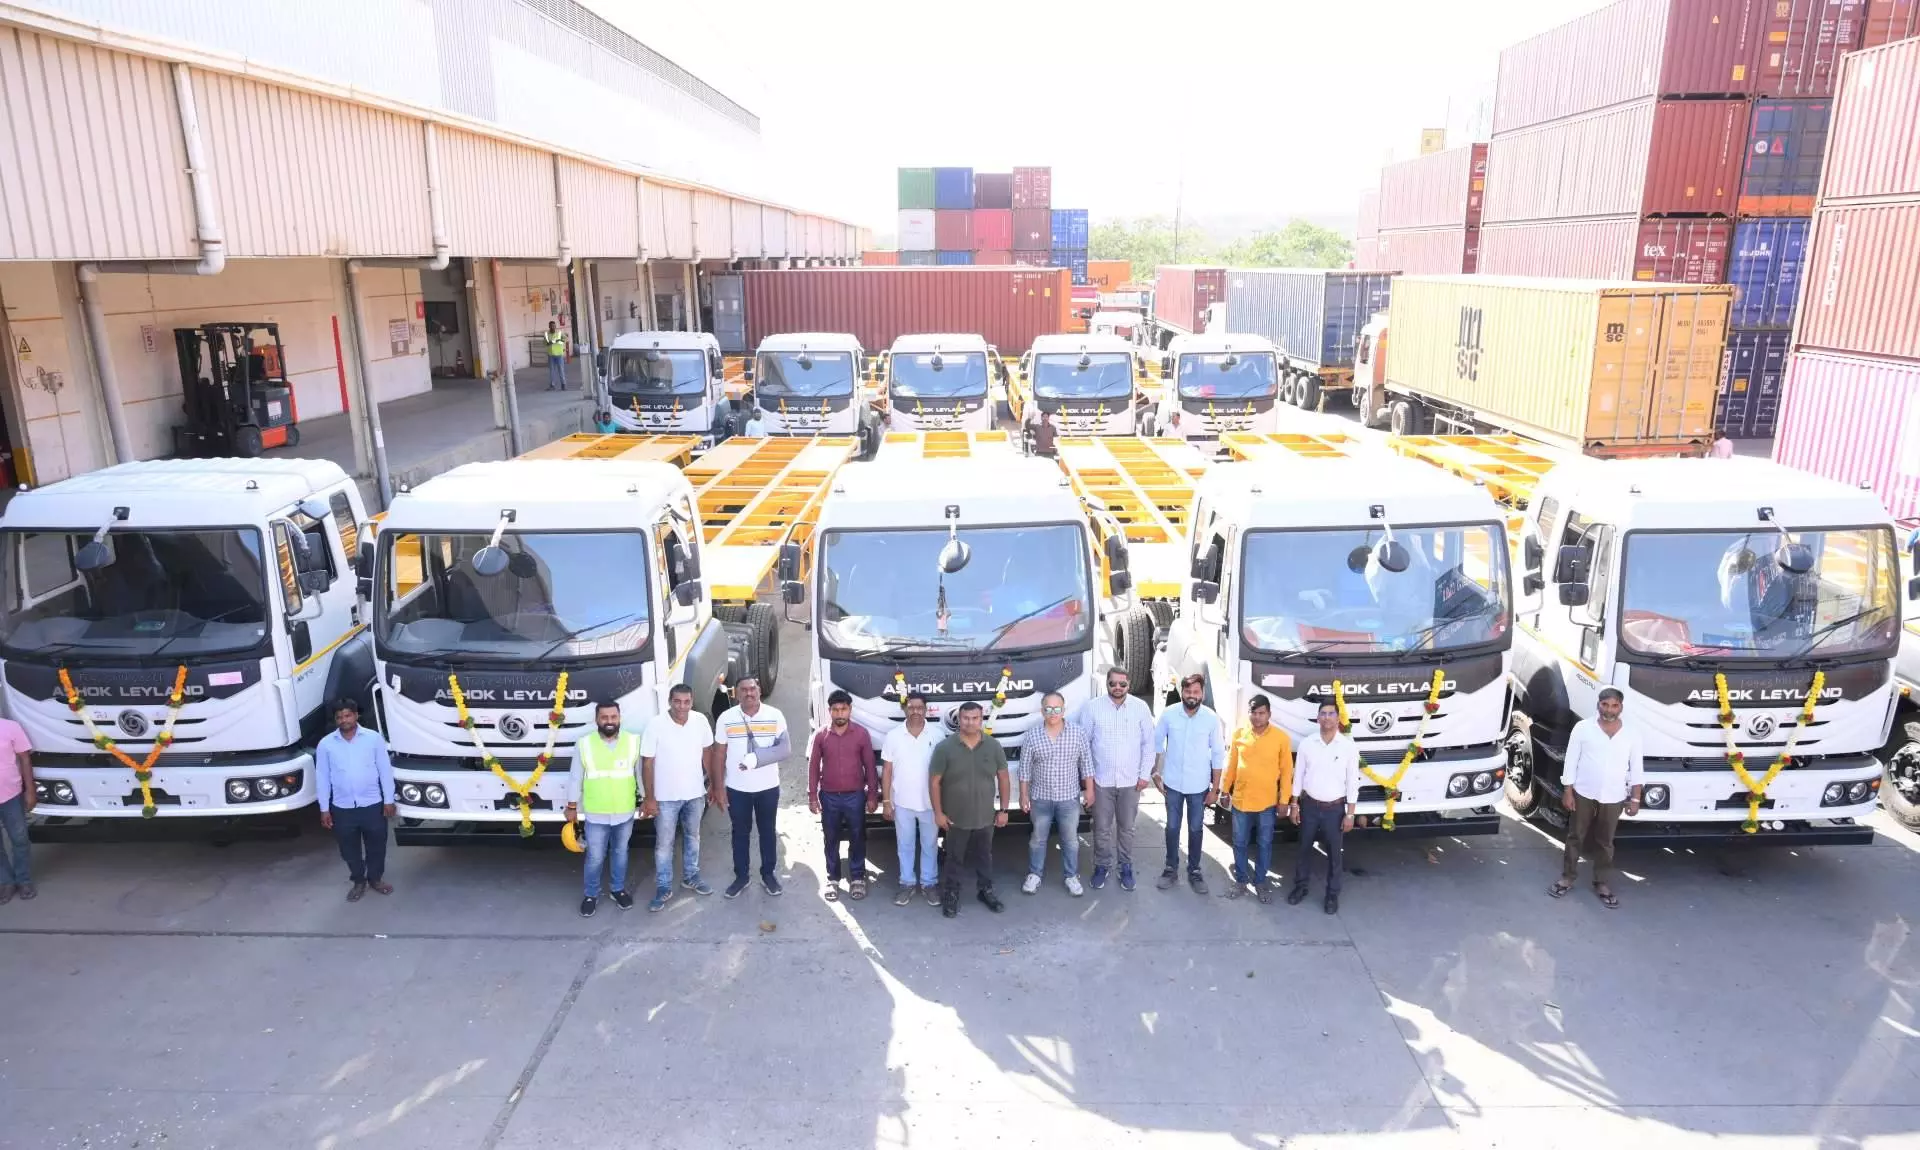 KSH Distriparks adds 40 new trailers to its fleet